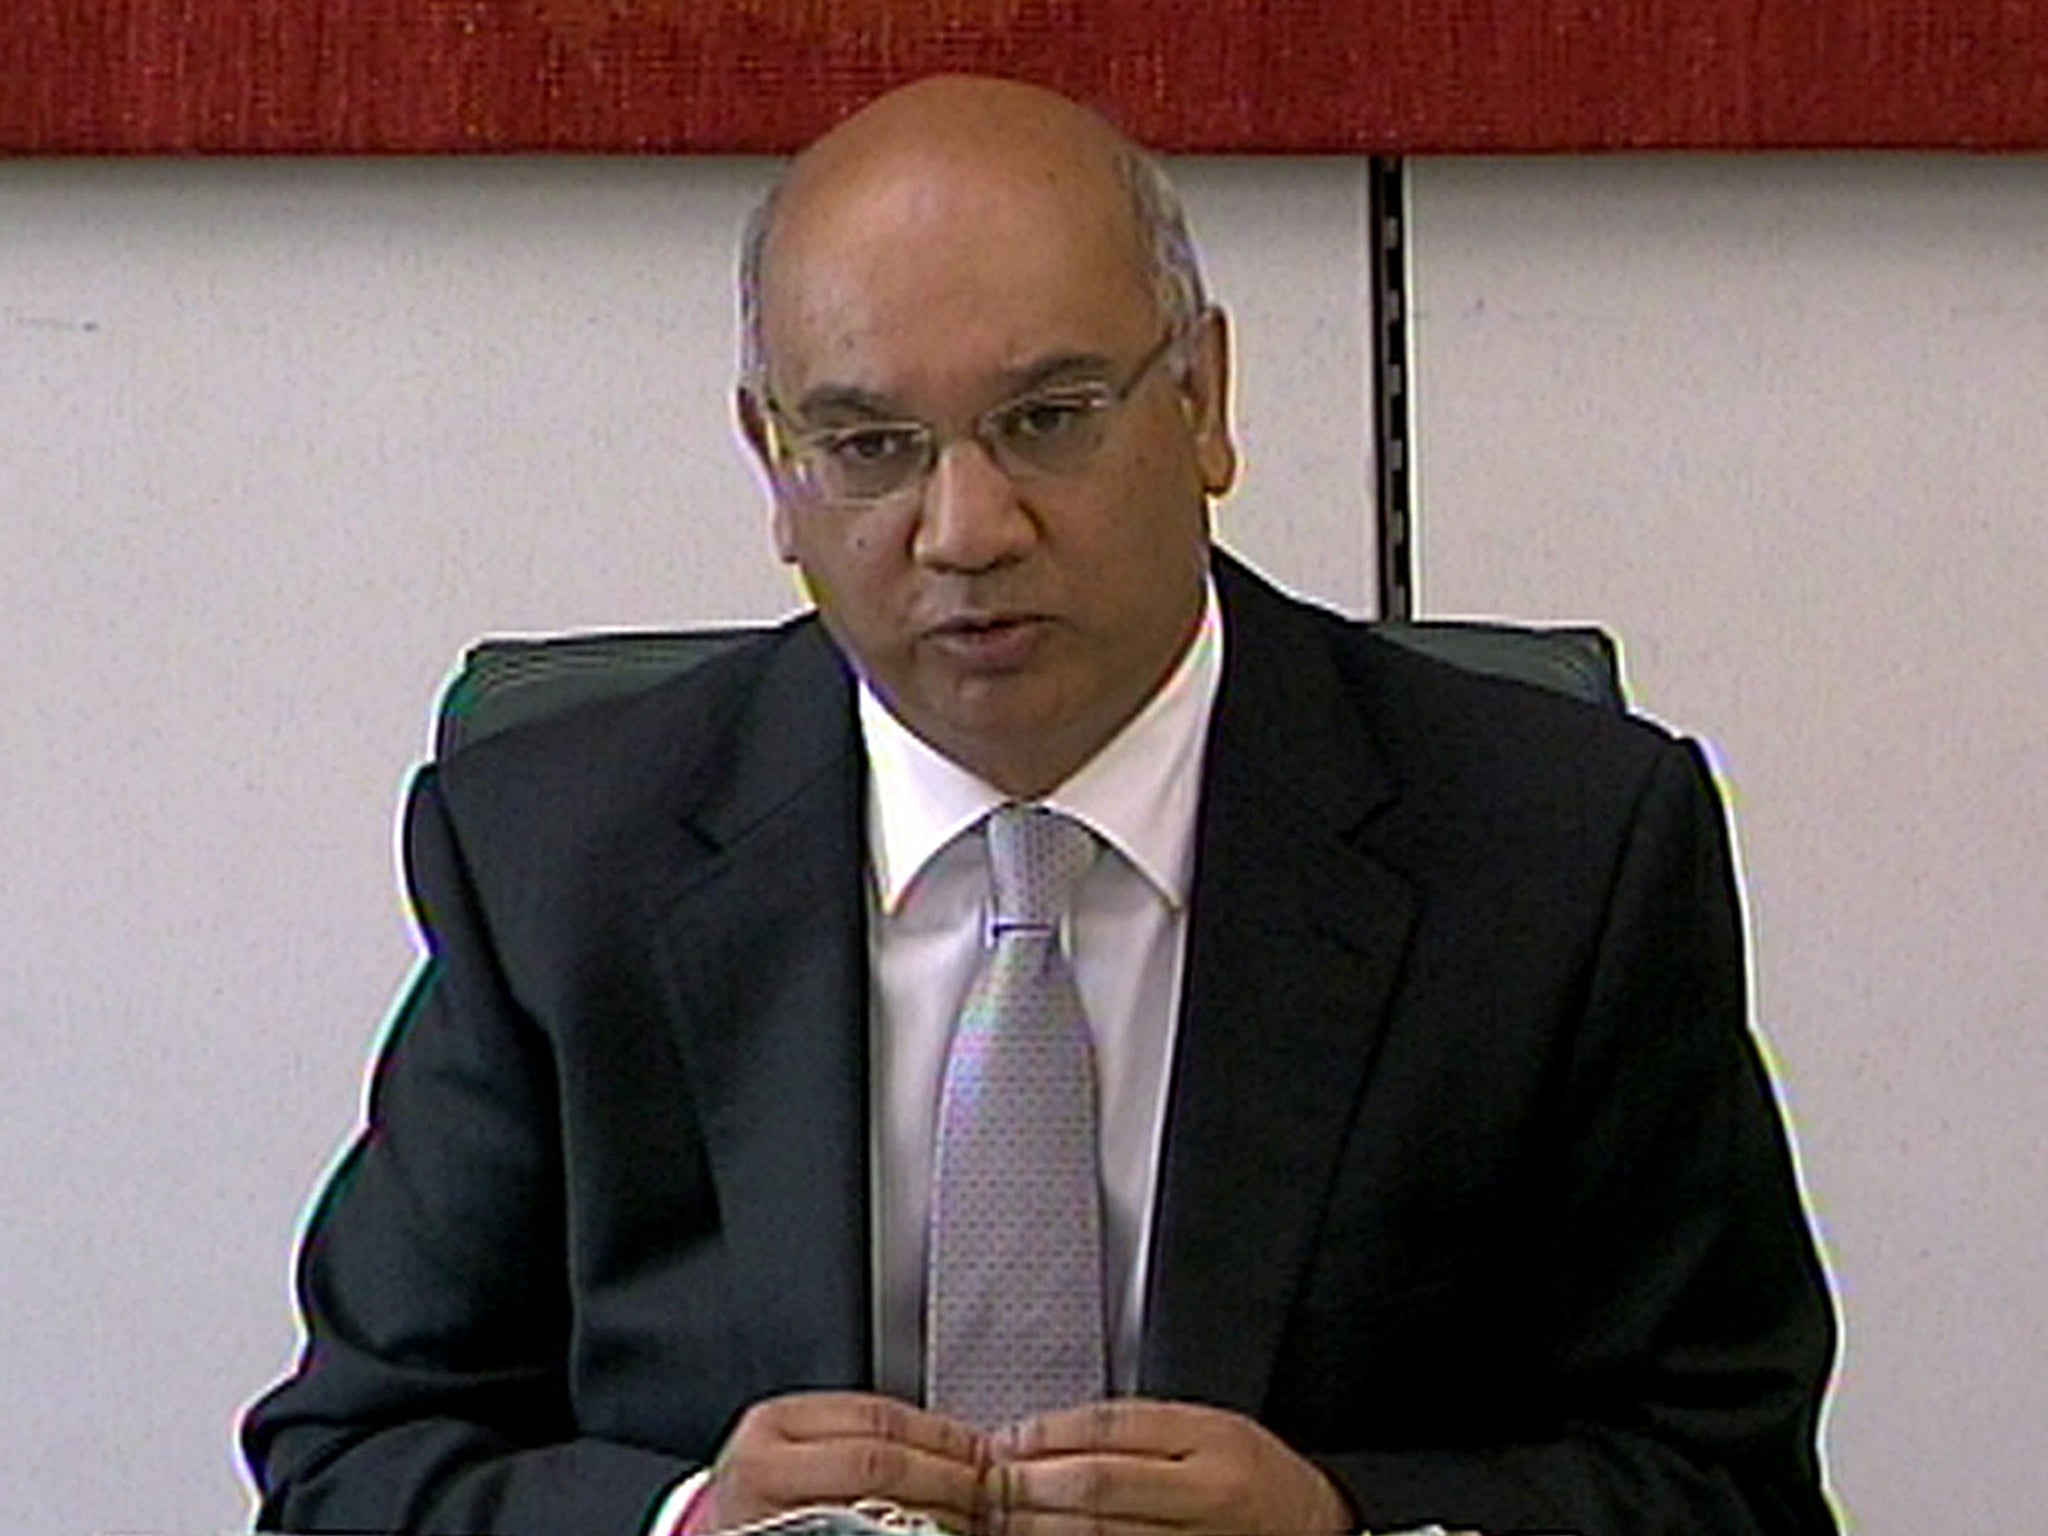 Keith Vaz, 59, quit as chairman of the Home Affairs committee in September